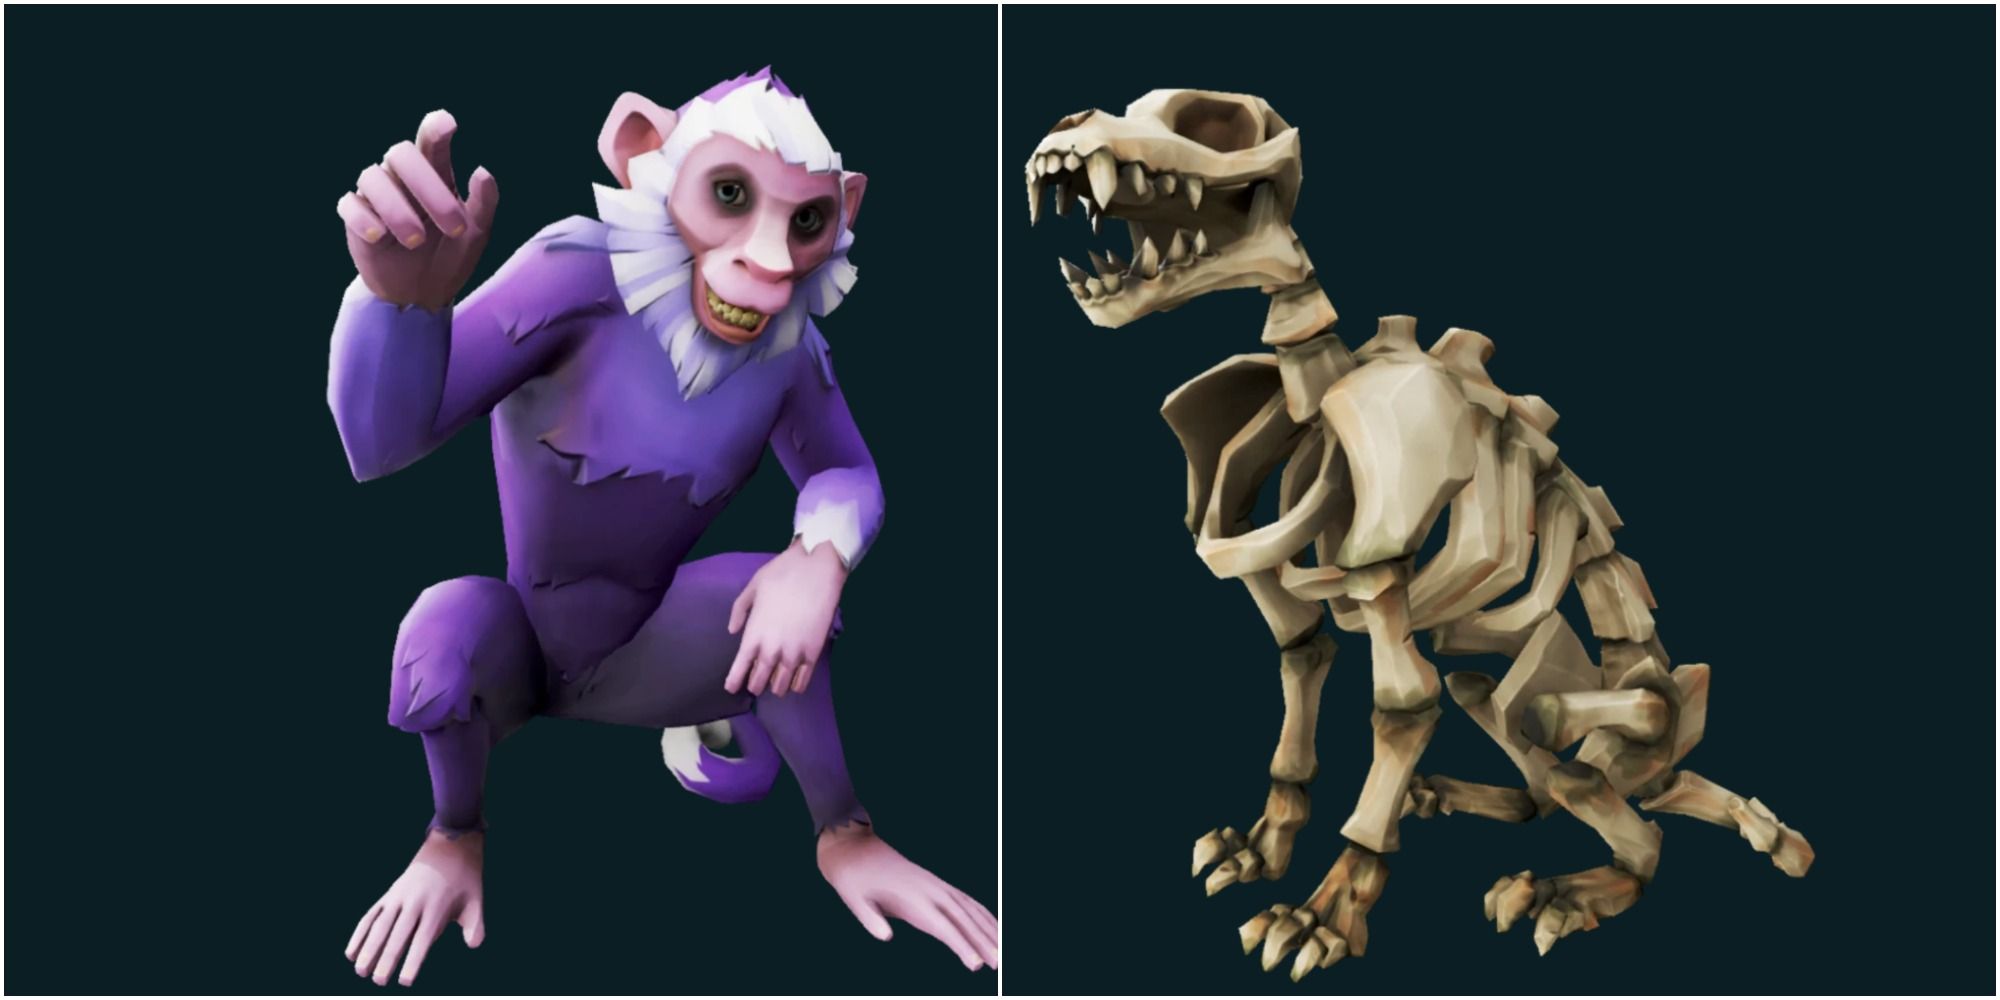 sea_of_thieves_monkey_pet_and_dog_pet